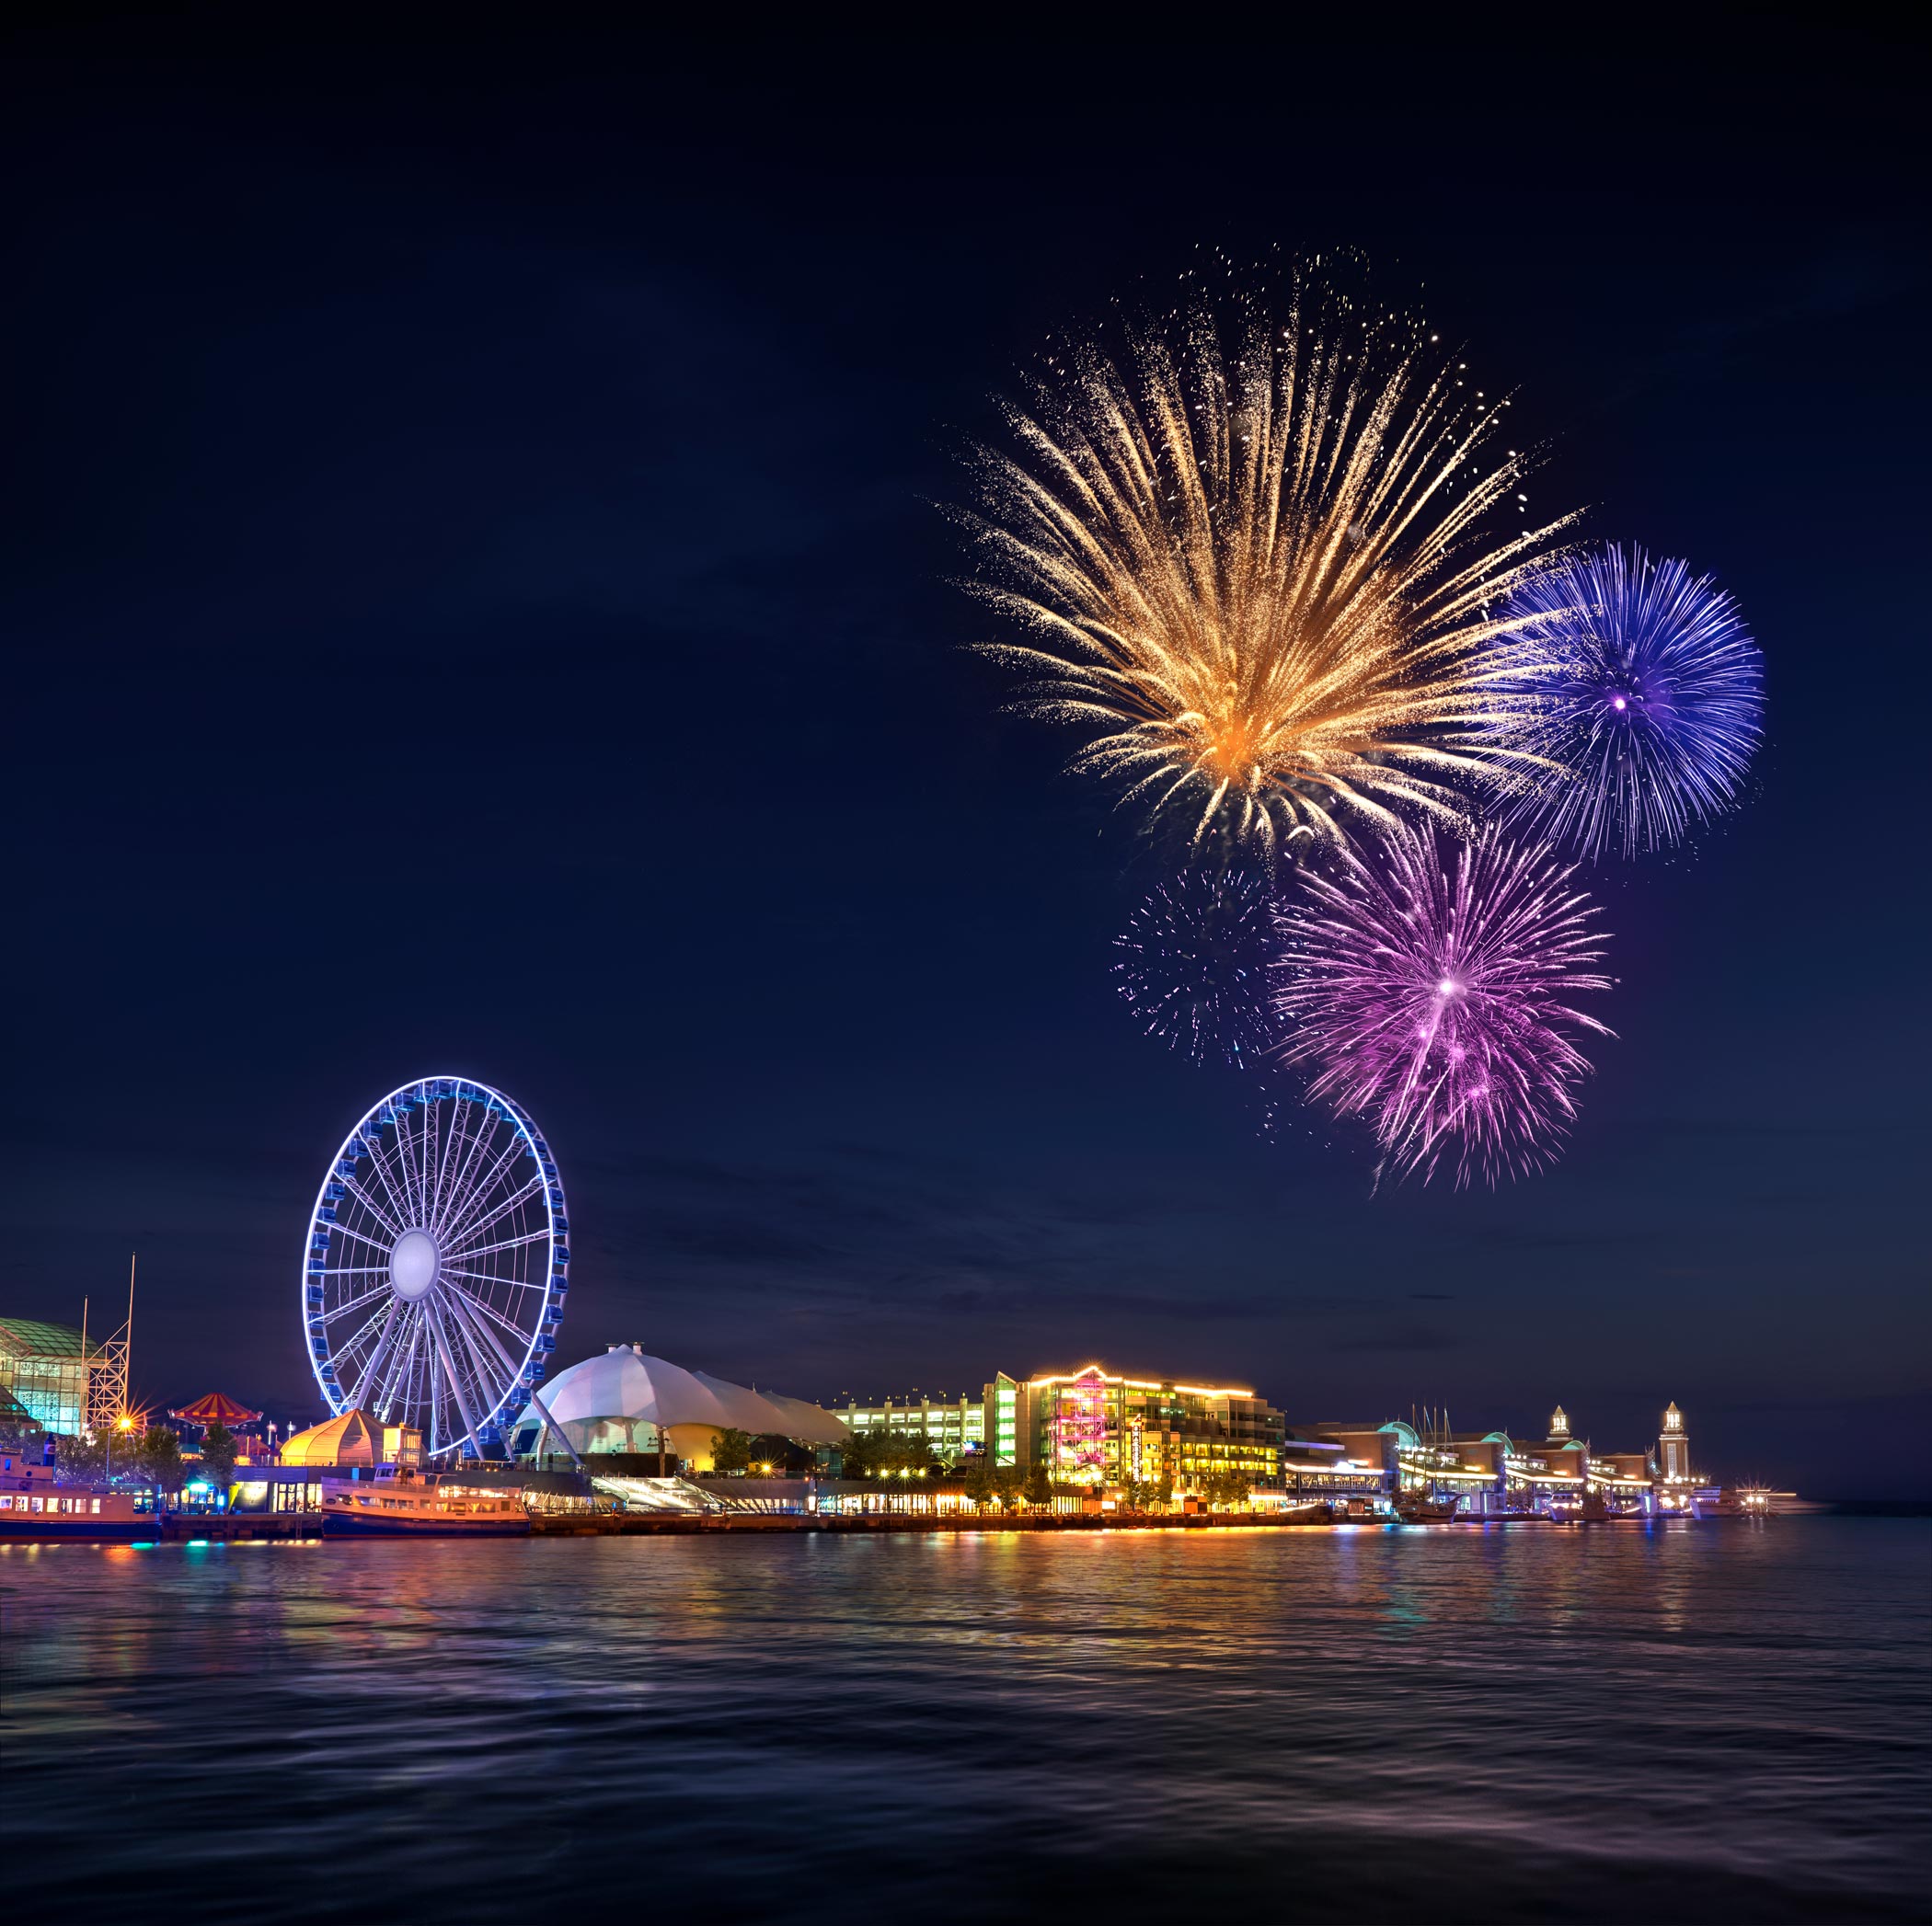 International Artists, Chicago Soul, and Spectacular Fireworks Set to Take Center Stage at Navy Pier This Spring/Summer